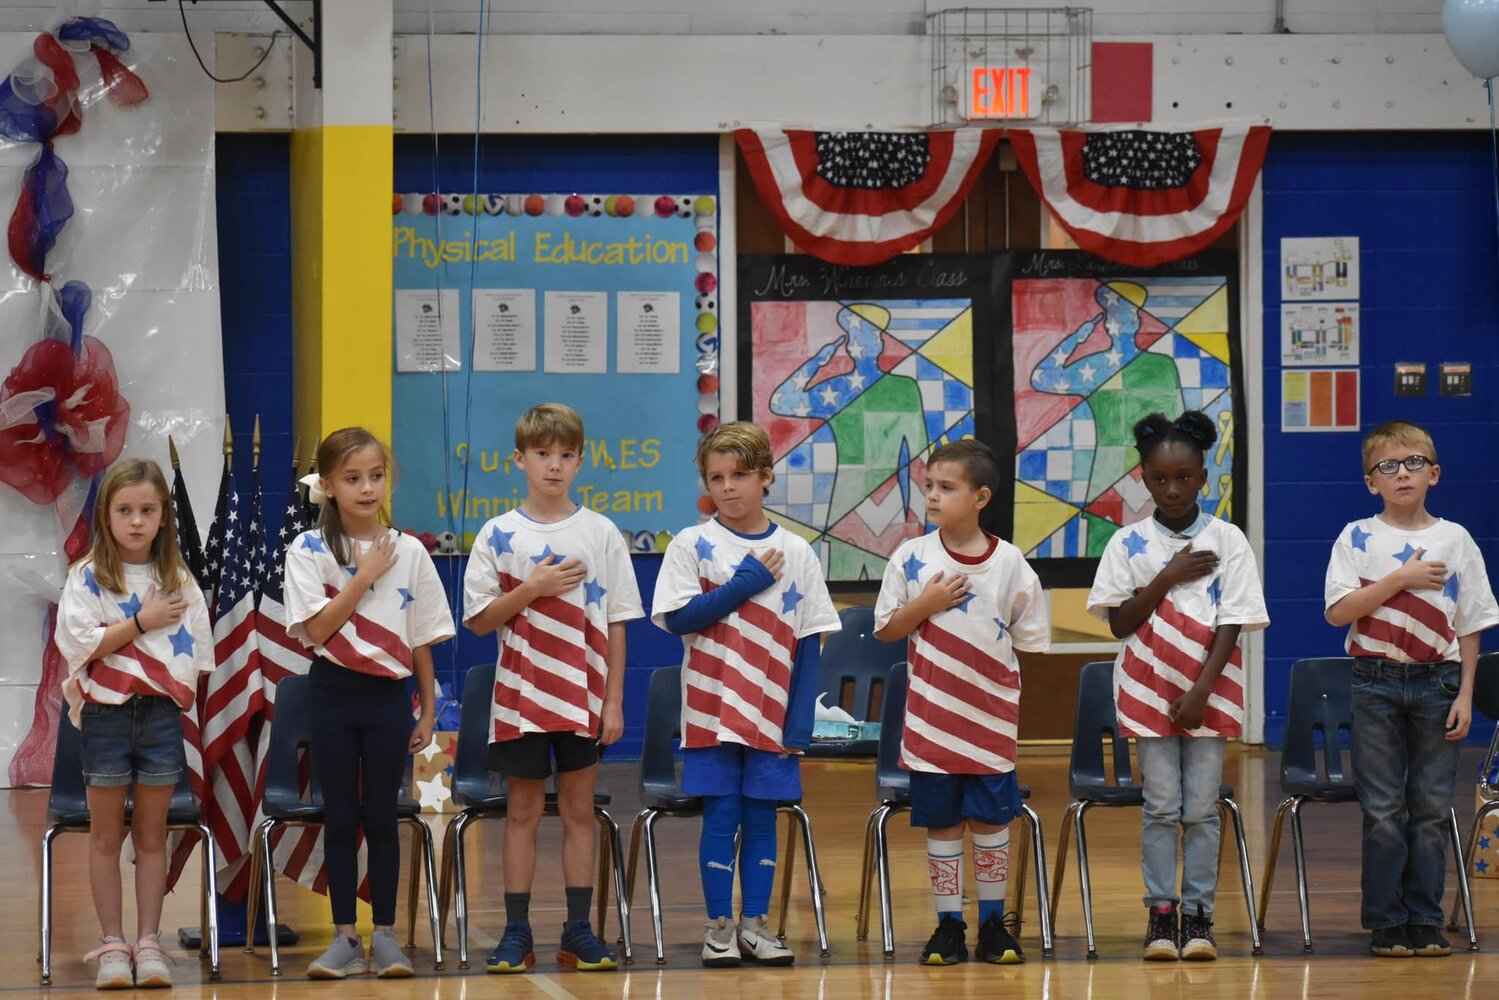 Second grade students at Fairhope West Elementary School honor local veterans with a musical tribute.